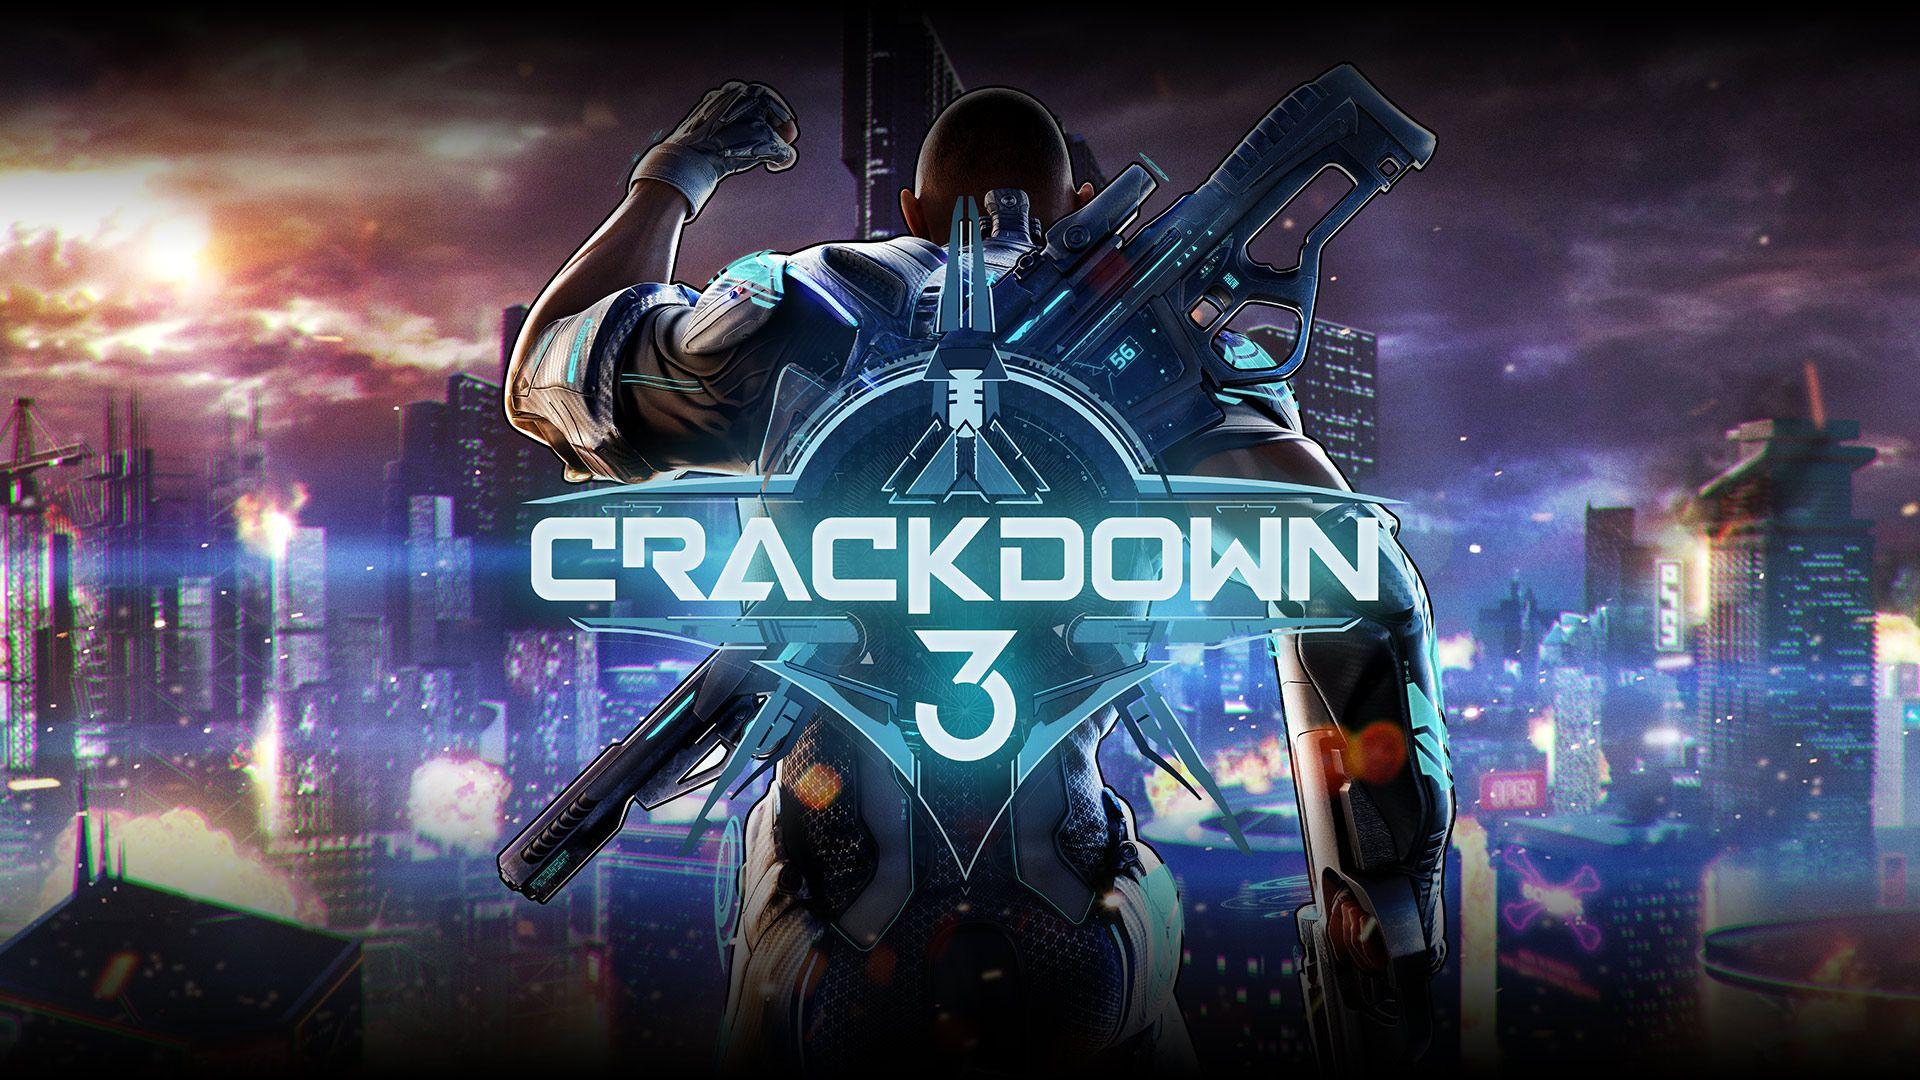 Crackdown 3 For Xbox One: Play With Xbox Game Pass